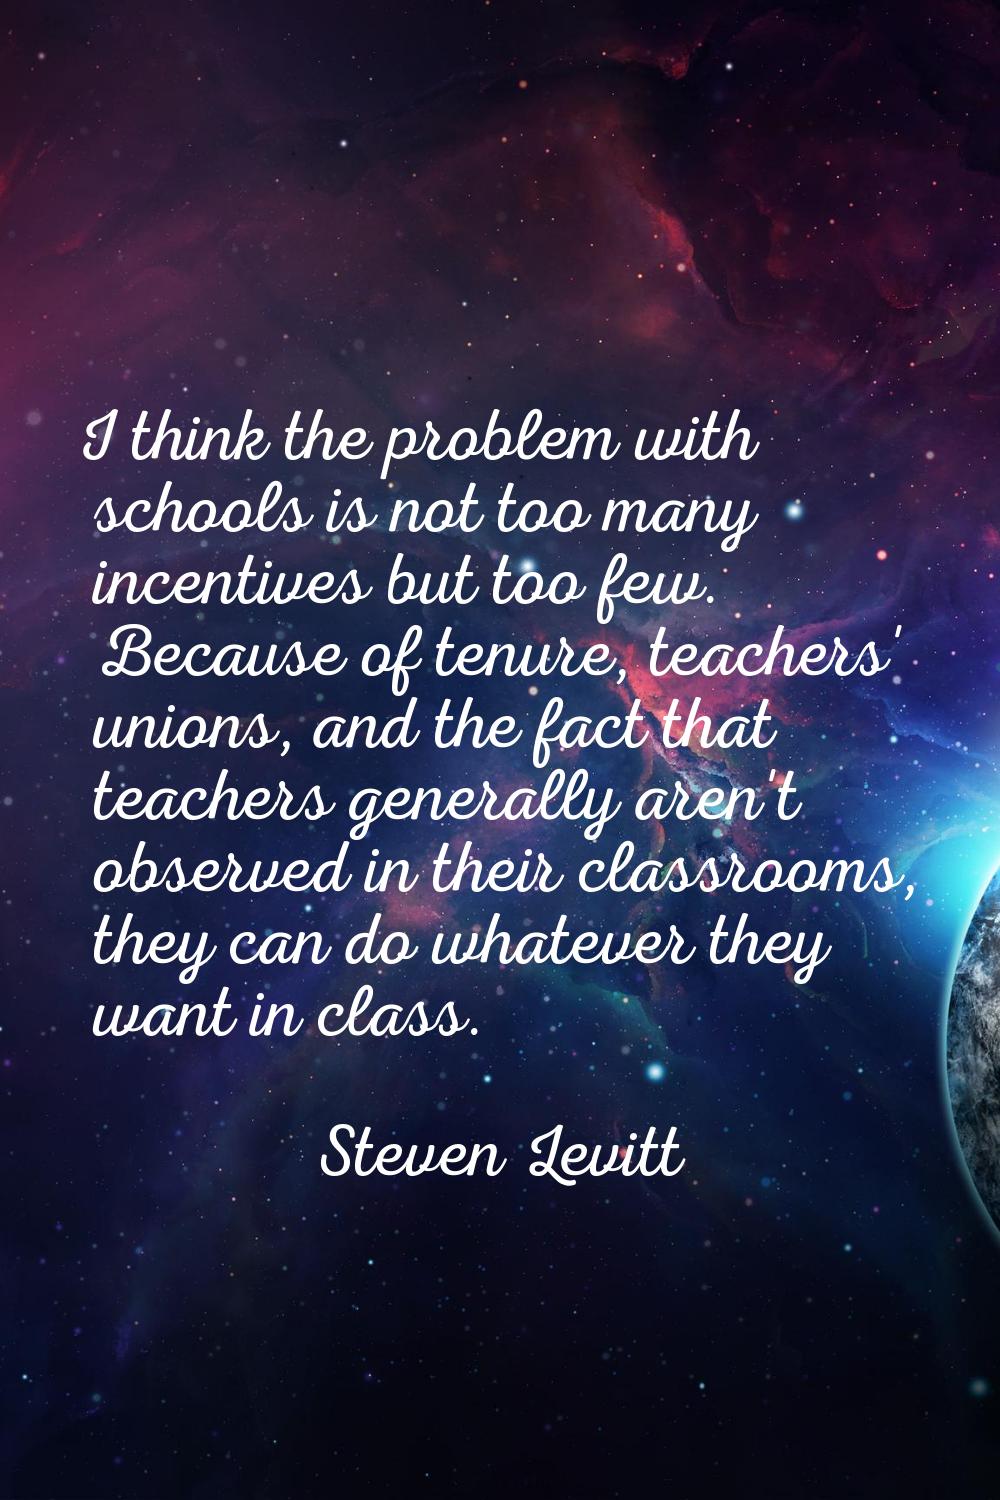 I think the problem with schools is not too many incentives but too few. Because of tenure, teacher